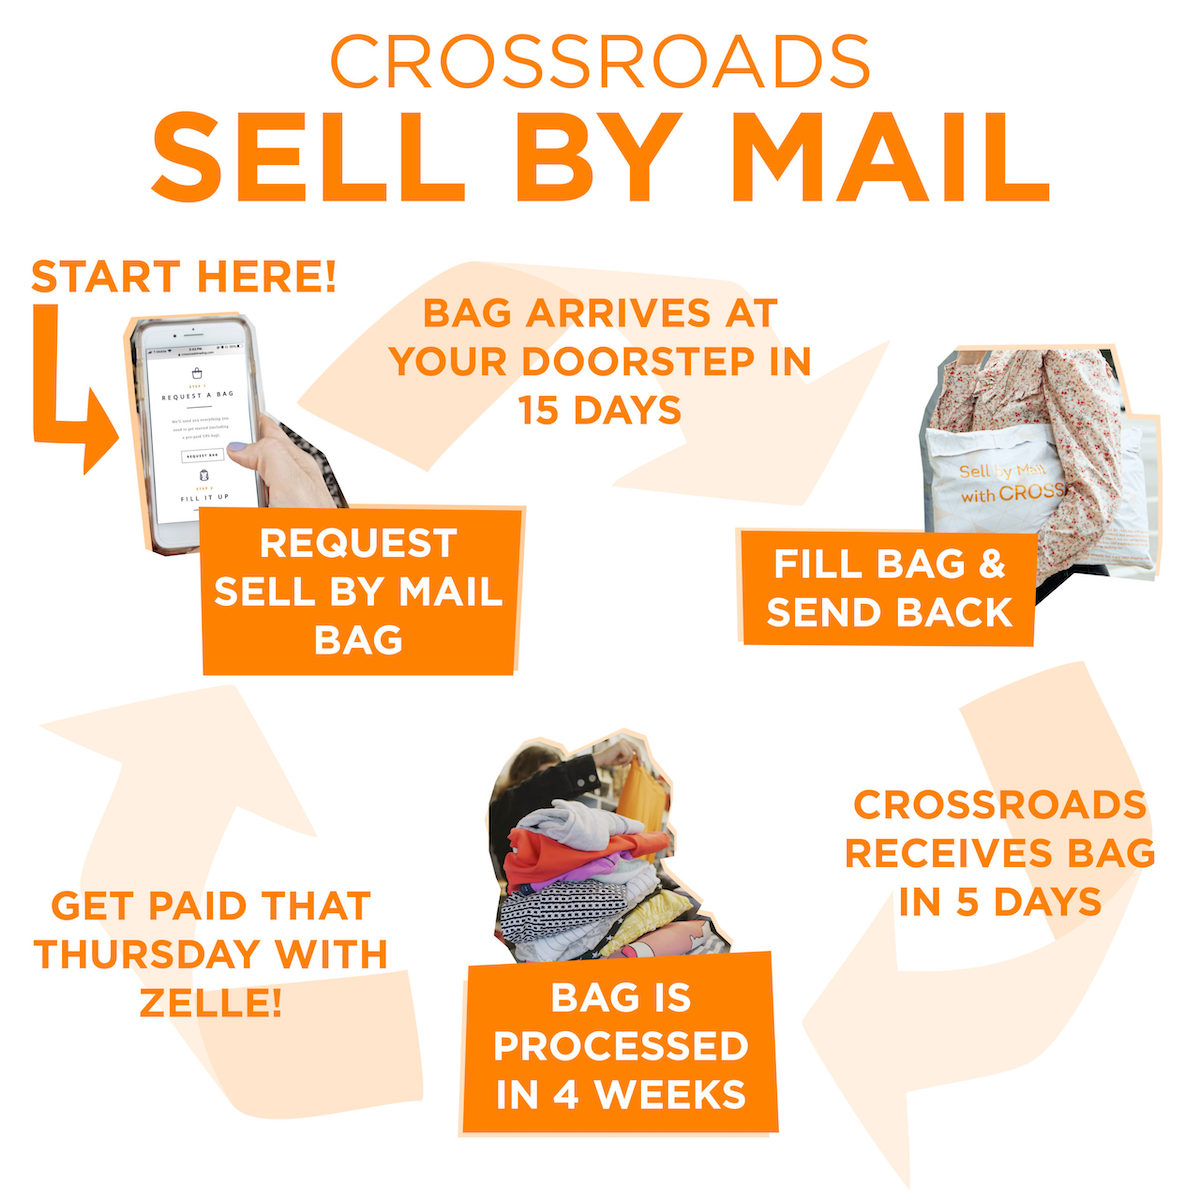 crossroads sell by mail graphic step by step outline of process